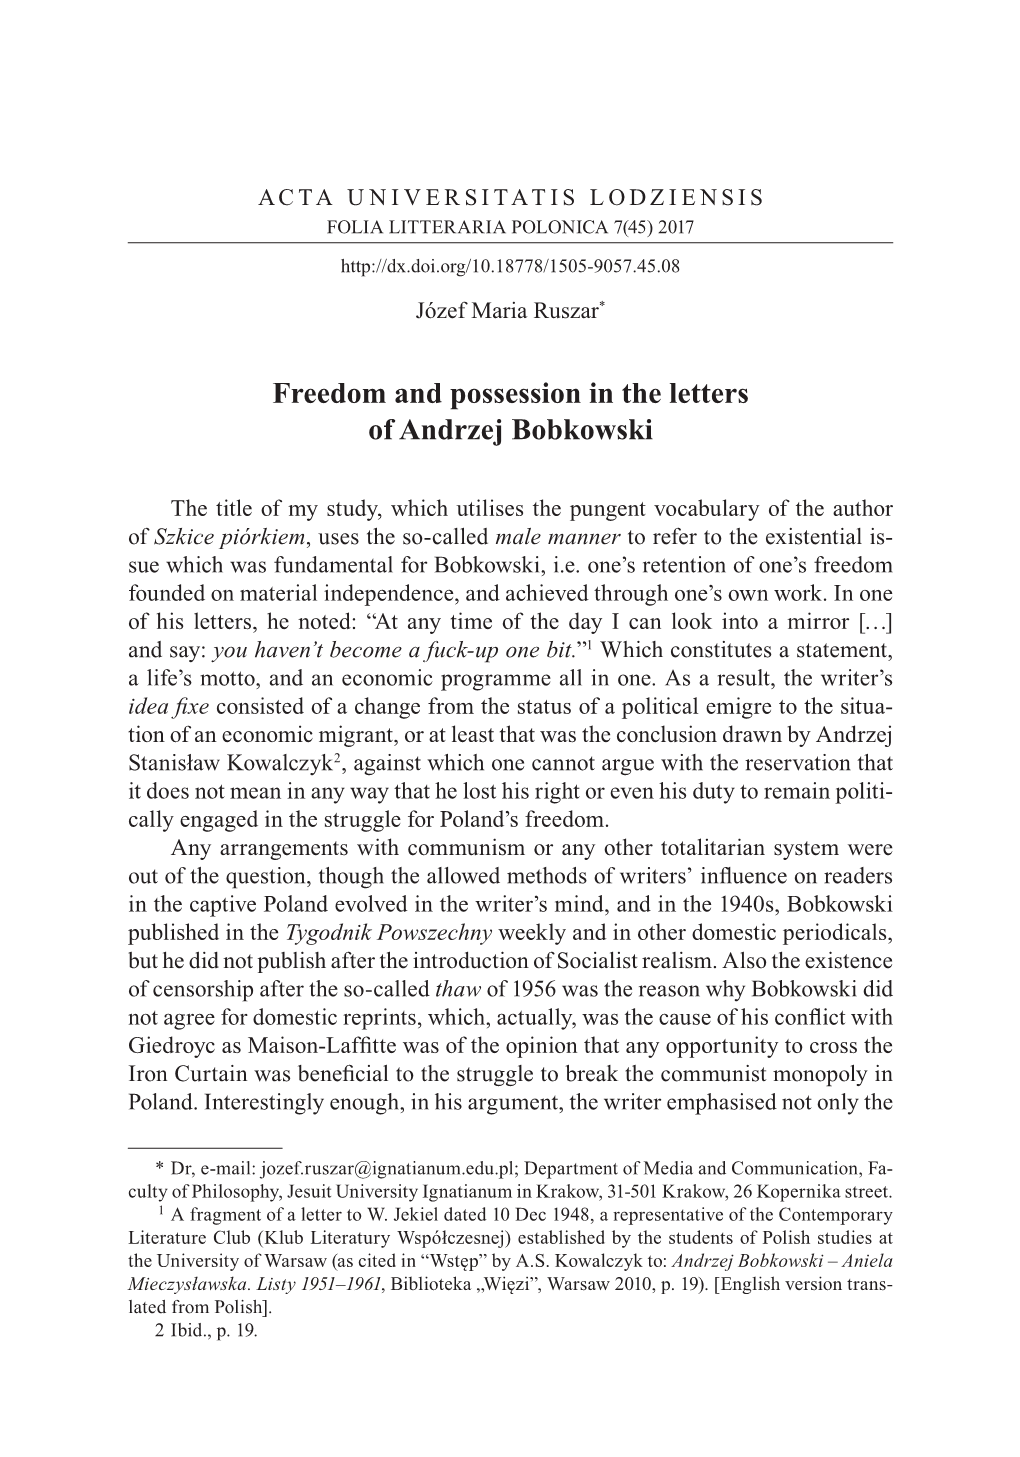 Freedom and Possession in the Letters of Andrzej Bobkowski